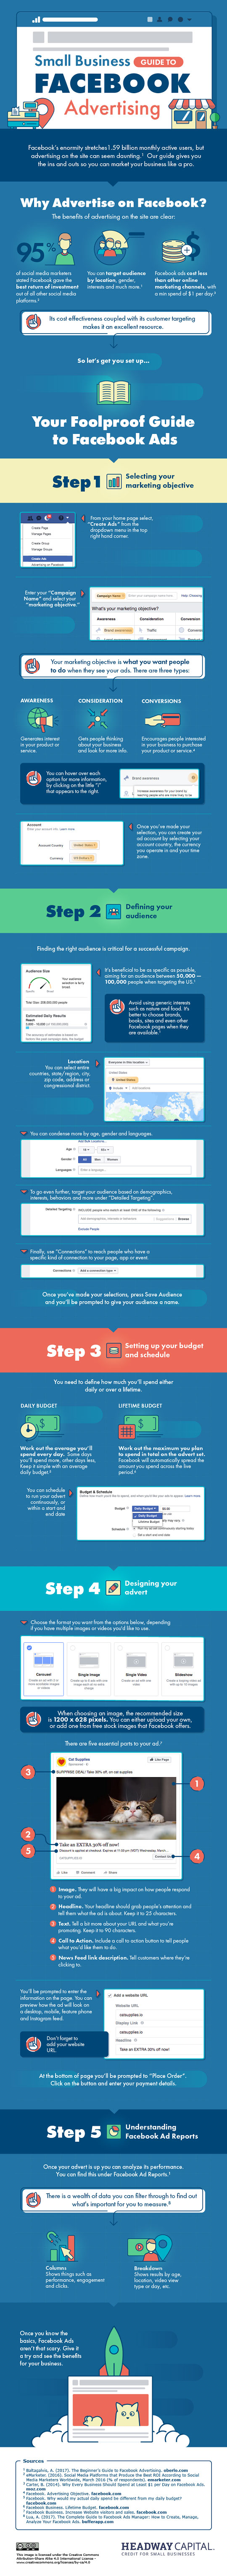 An All-In-One Guide To Facebook Advertising (Infographic)